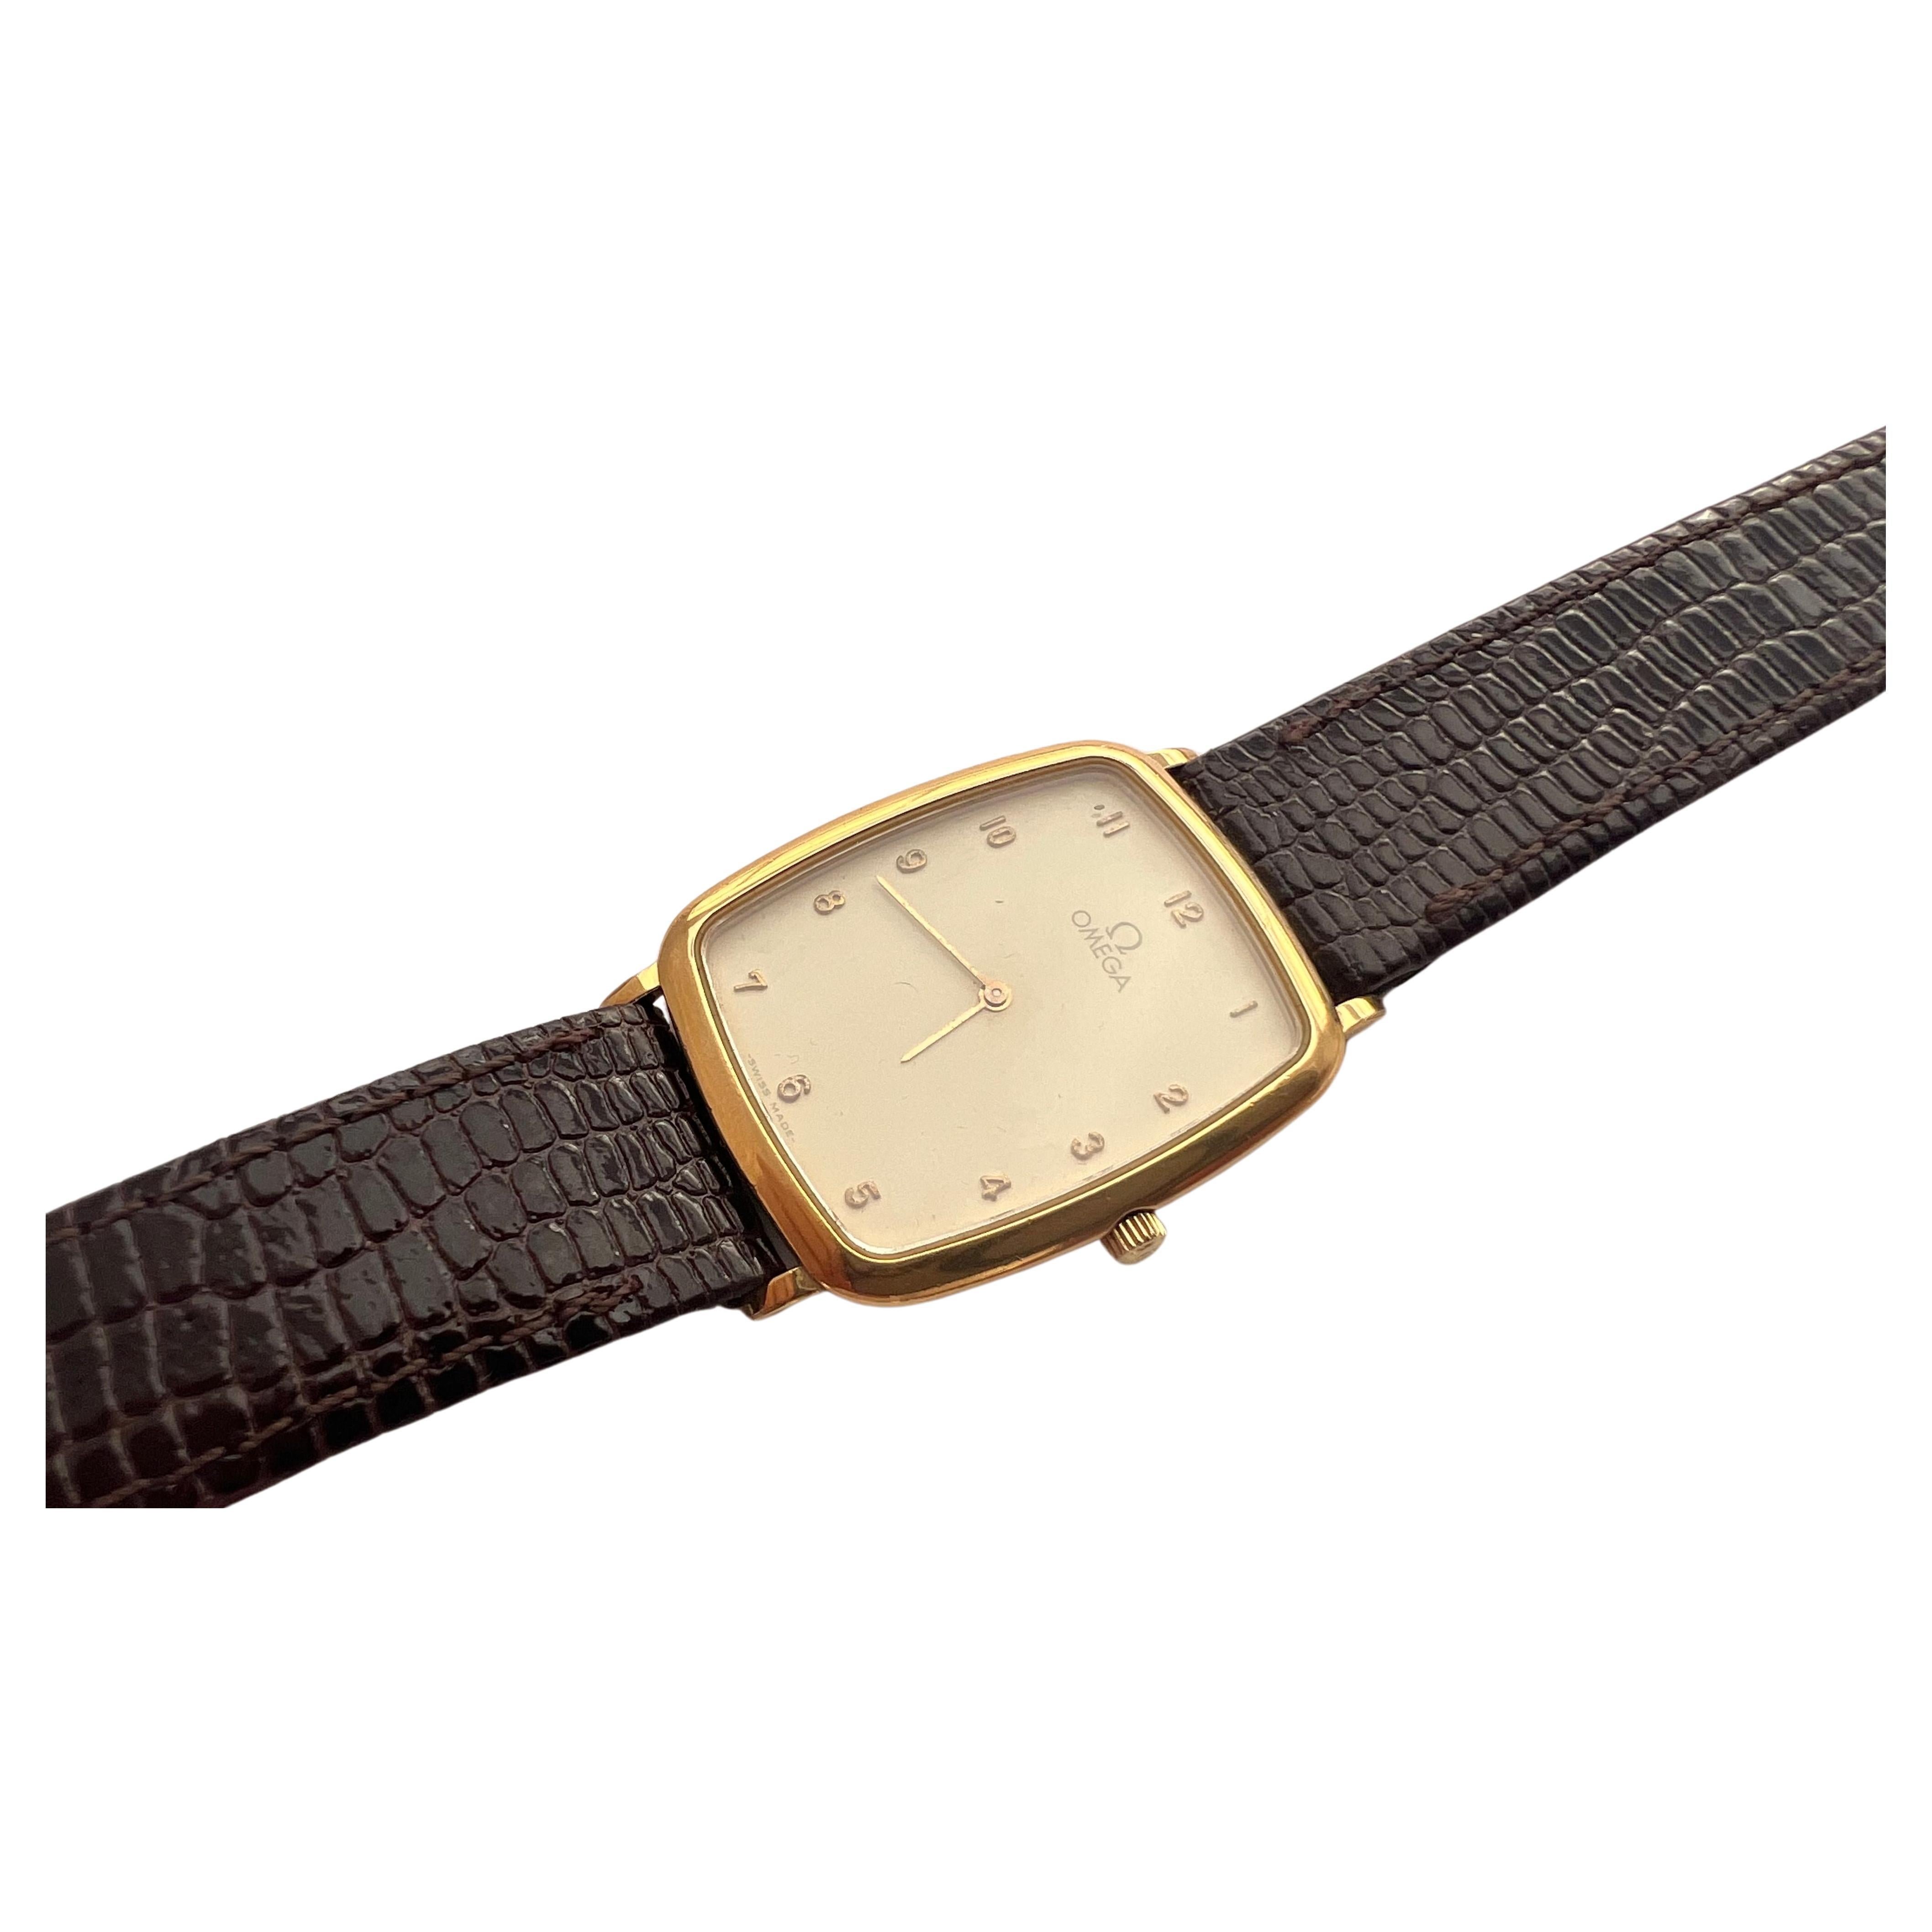 ​Brand : Omega

Model: Deville

Reference Number : 195.0076.2 

Features: Slim -  Arabic Numerals Dial 

Country Of Manufacture: Switzerland

Movement: Quartz 

Case Material: Gold Plated  Stainless Steel

Measurements : 26.3mm (excluding crown) X